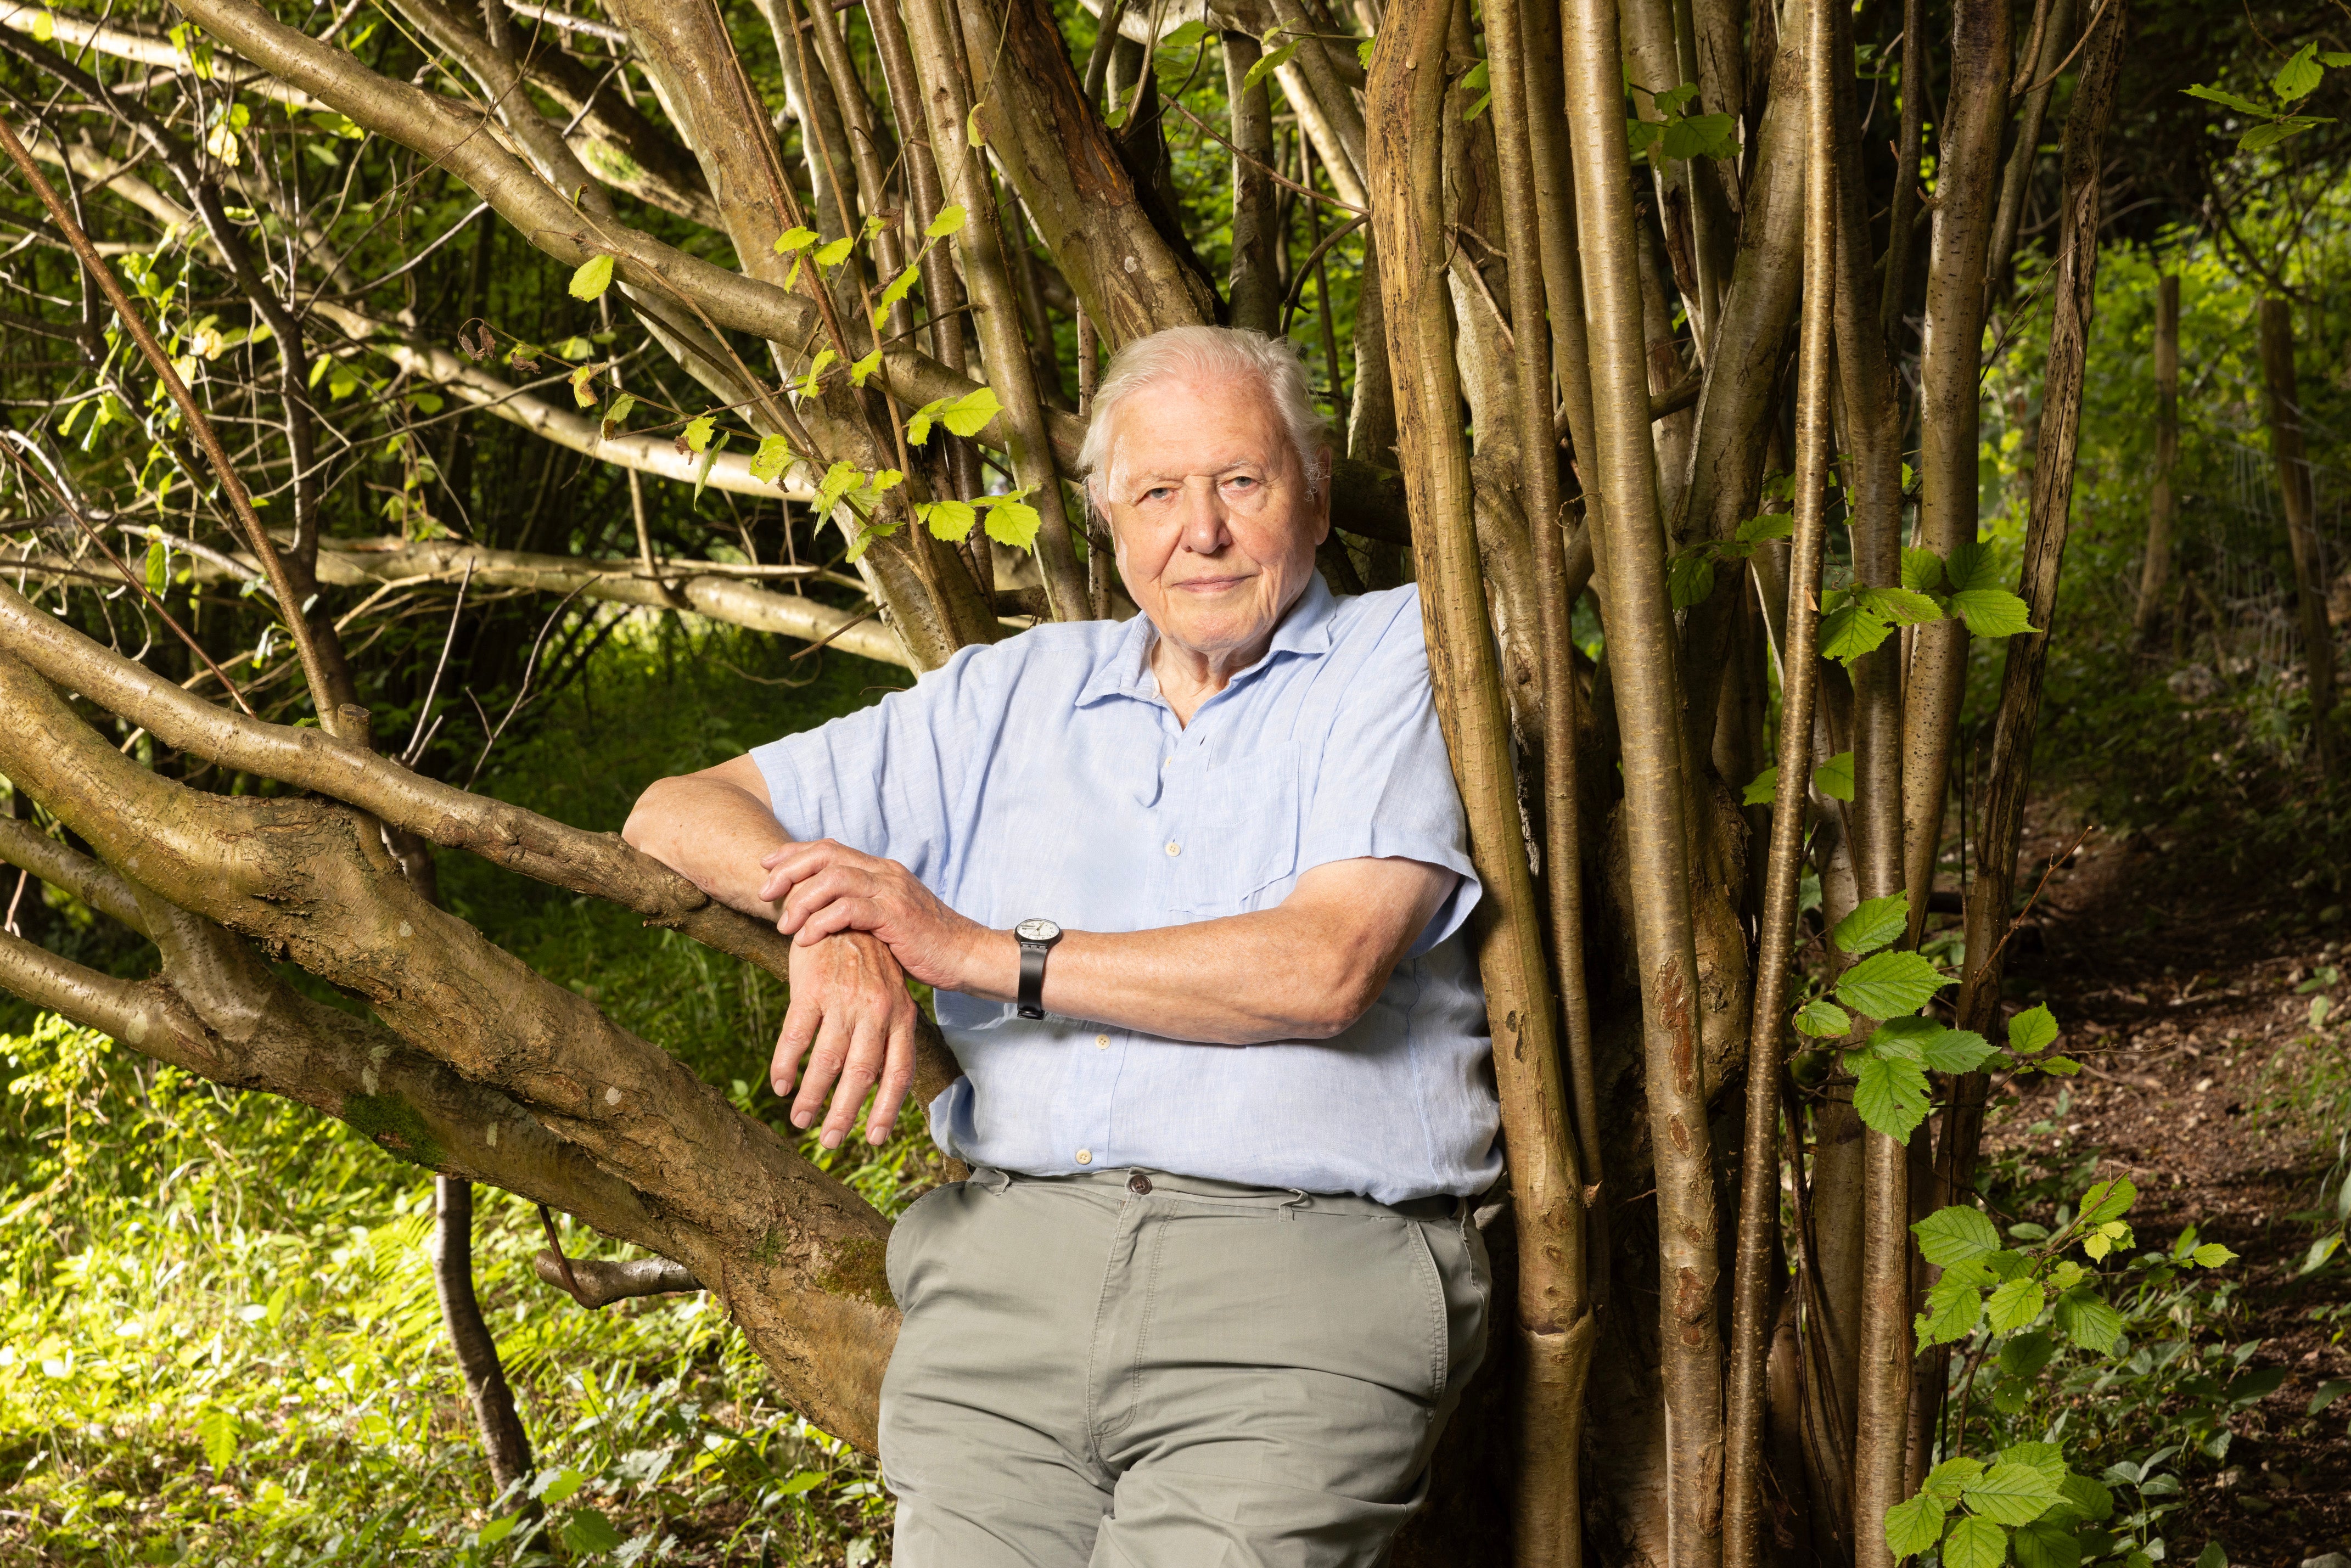 Attenborough during the filming of ‘Planet Earth III’